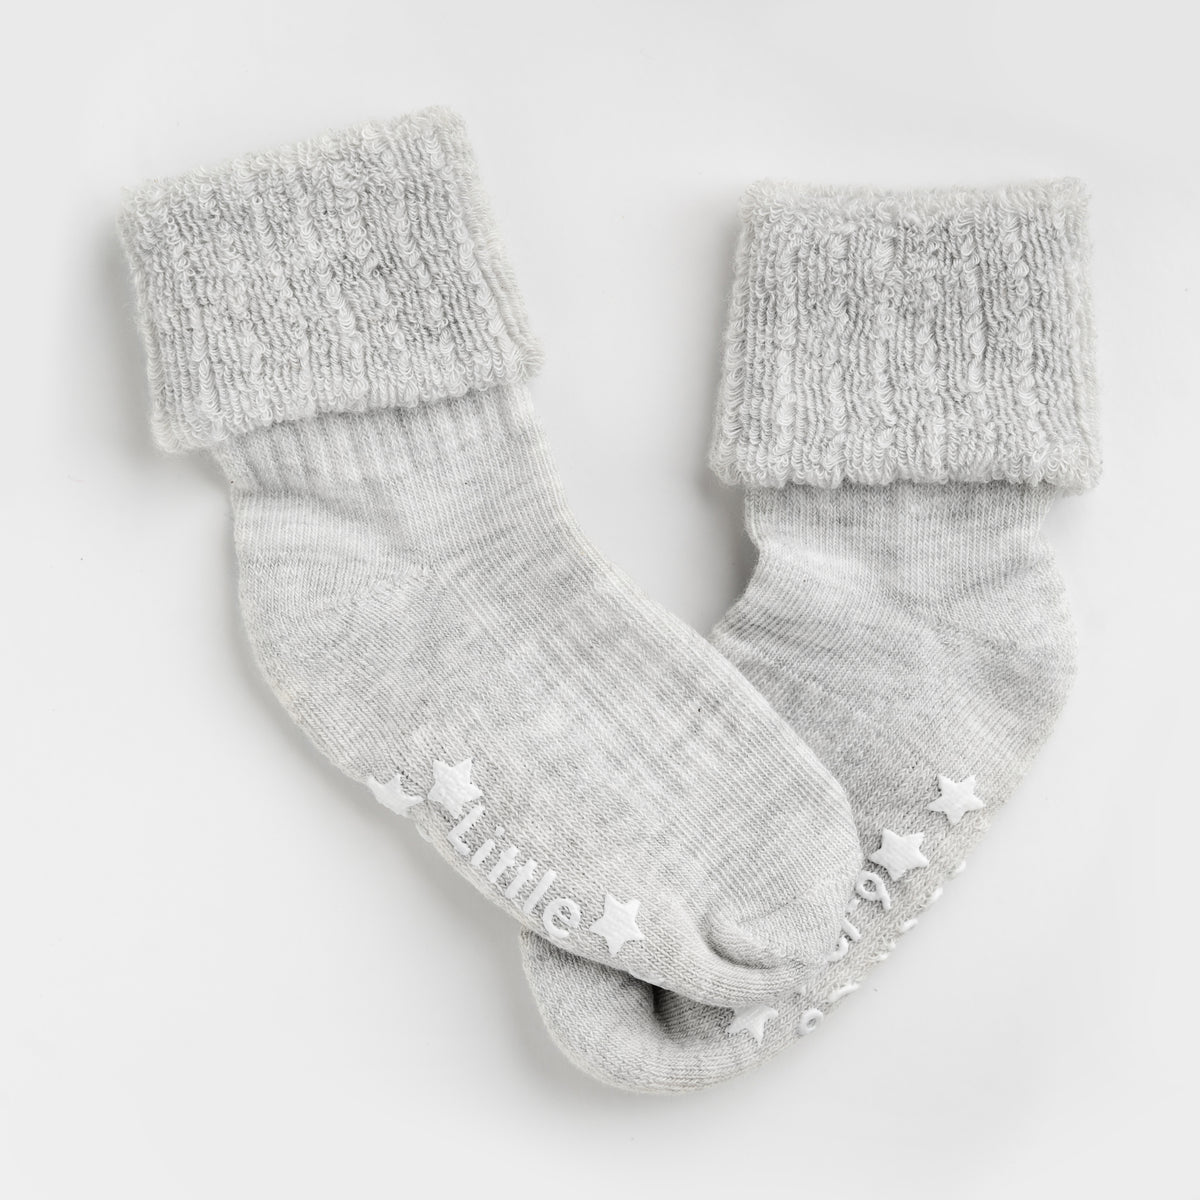 Cosy Stay on Winter Warm Non Slip Baby Socks - 3 Pack in Matcha and Cloud Grey - 0-2 Years